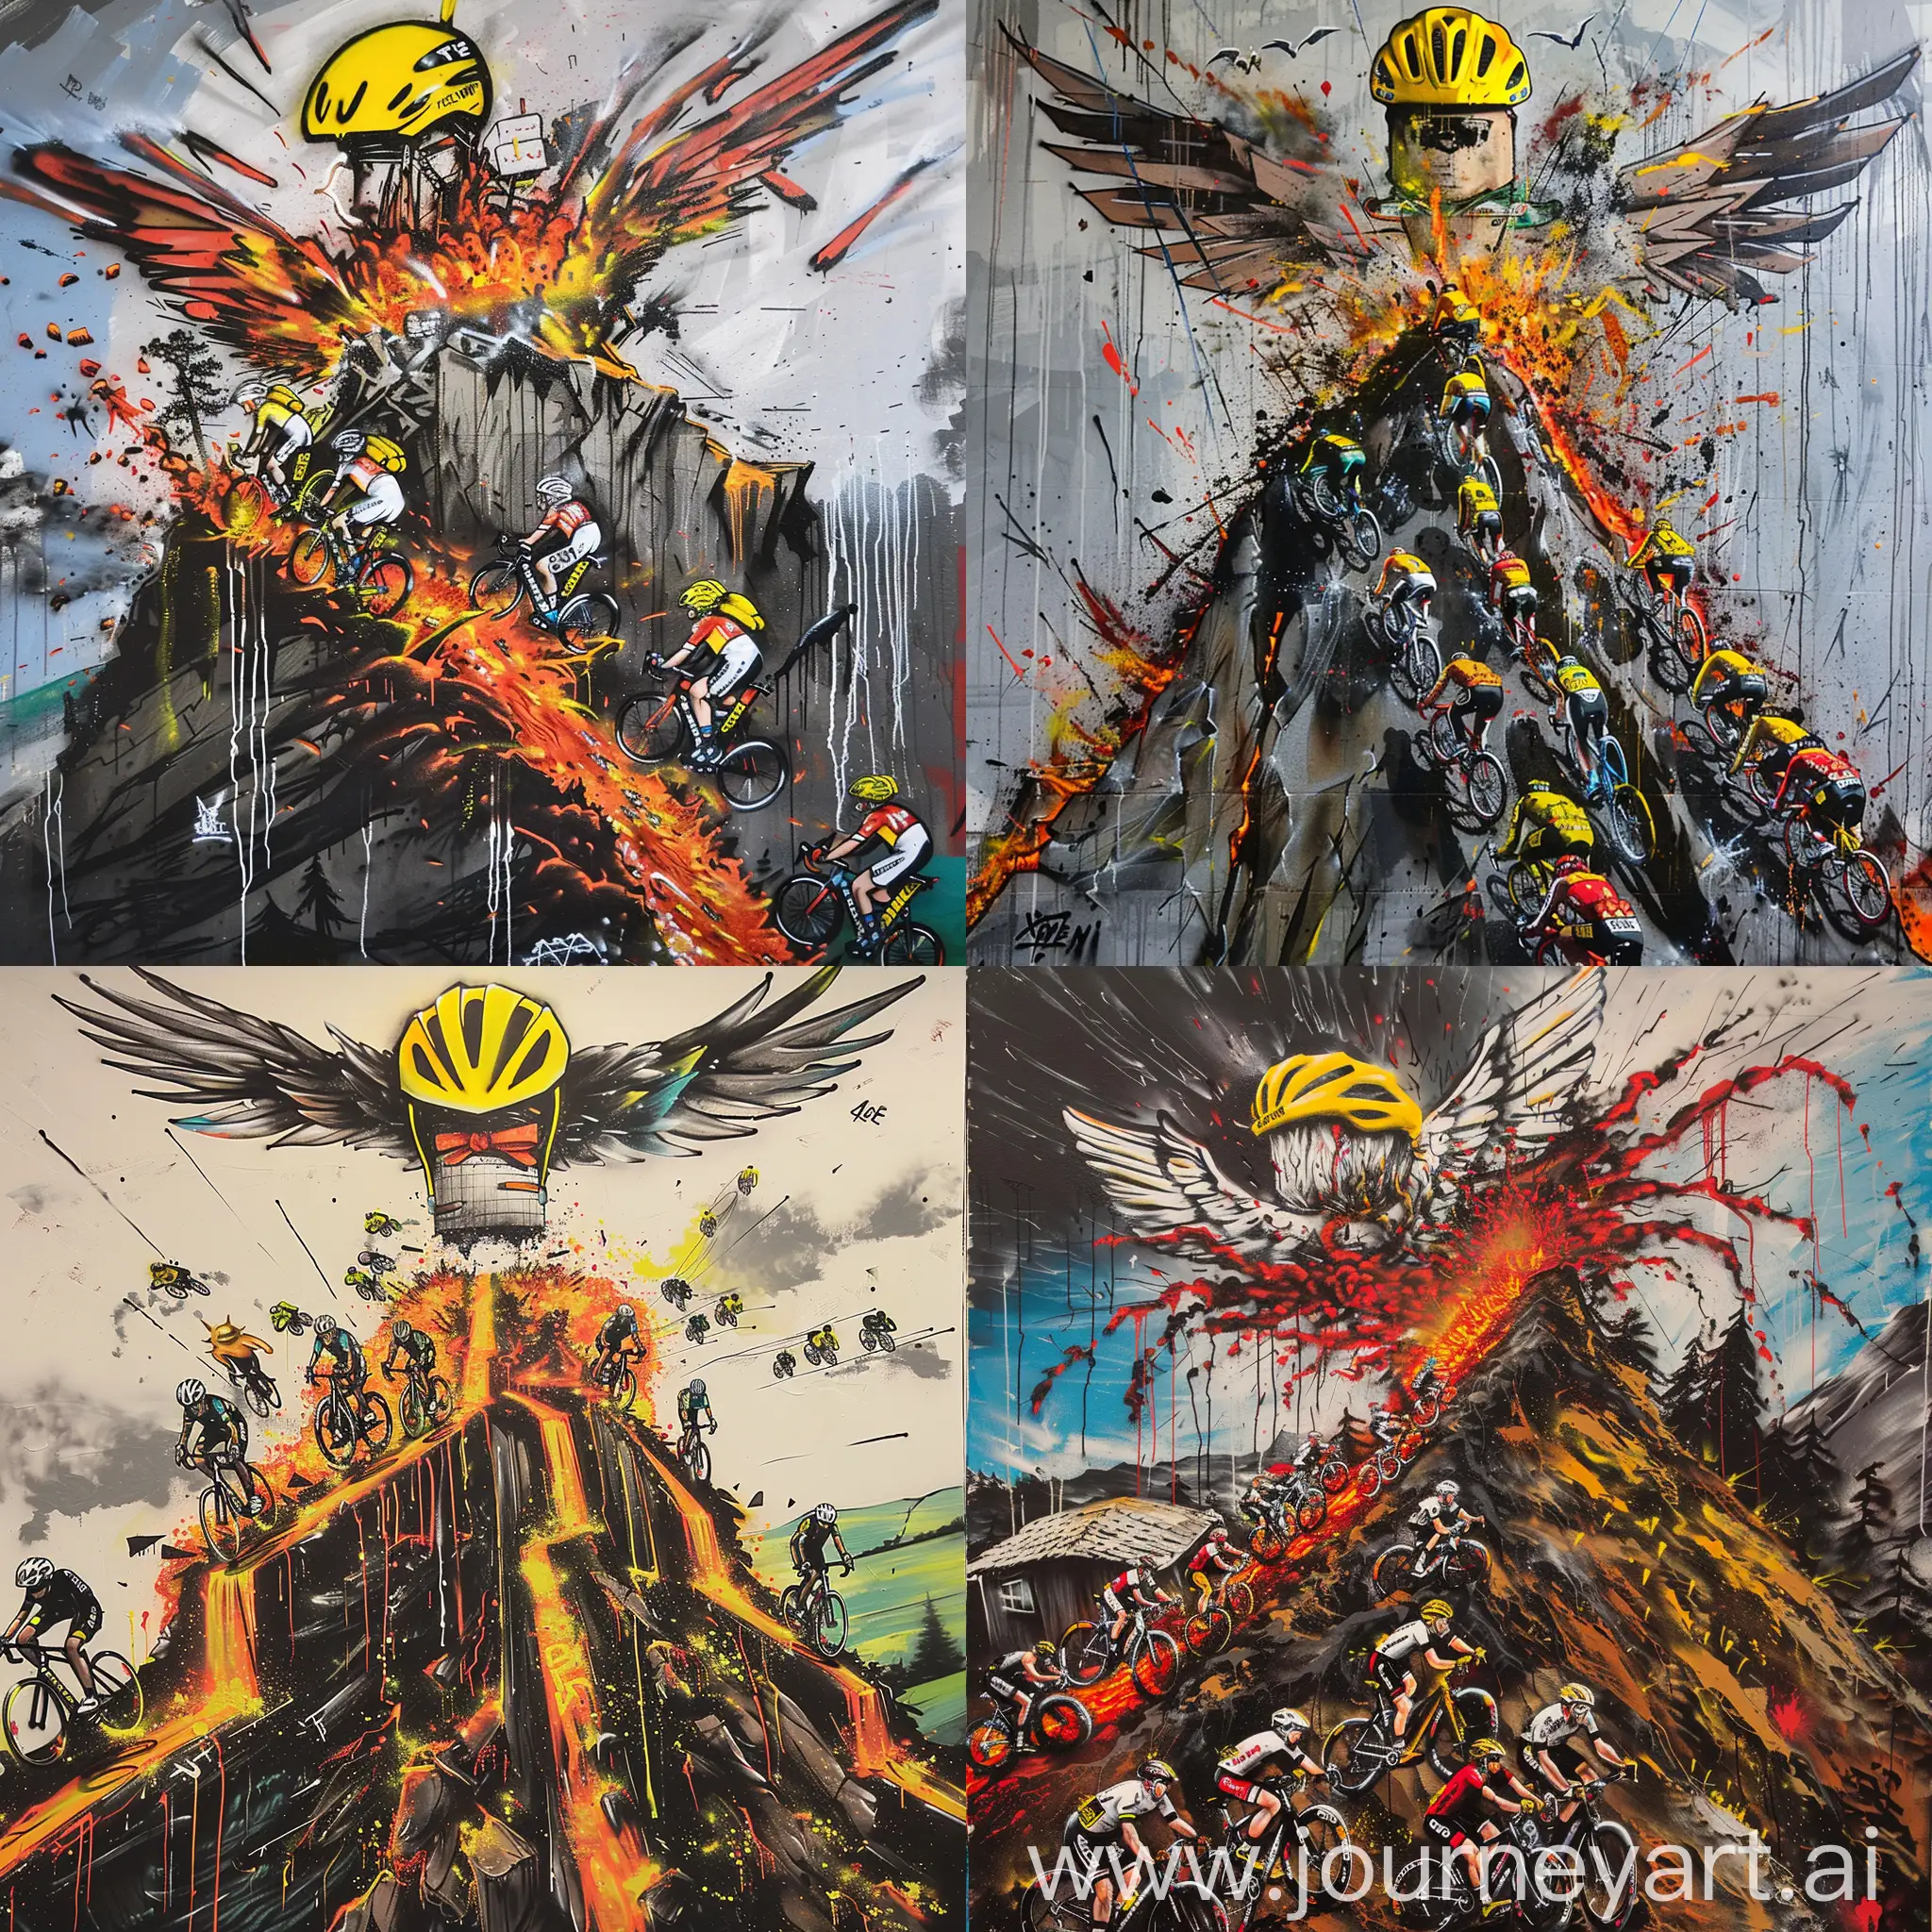 Volcanic-Ascent-Graffiti-Tour-de-France-with-Lava-and-Flying-Farm